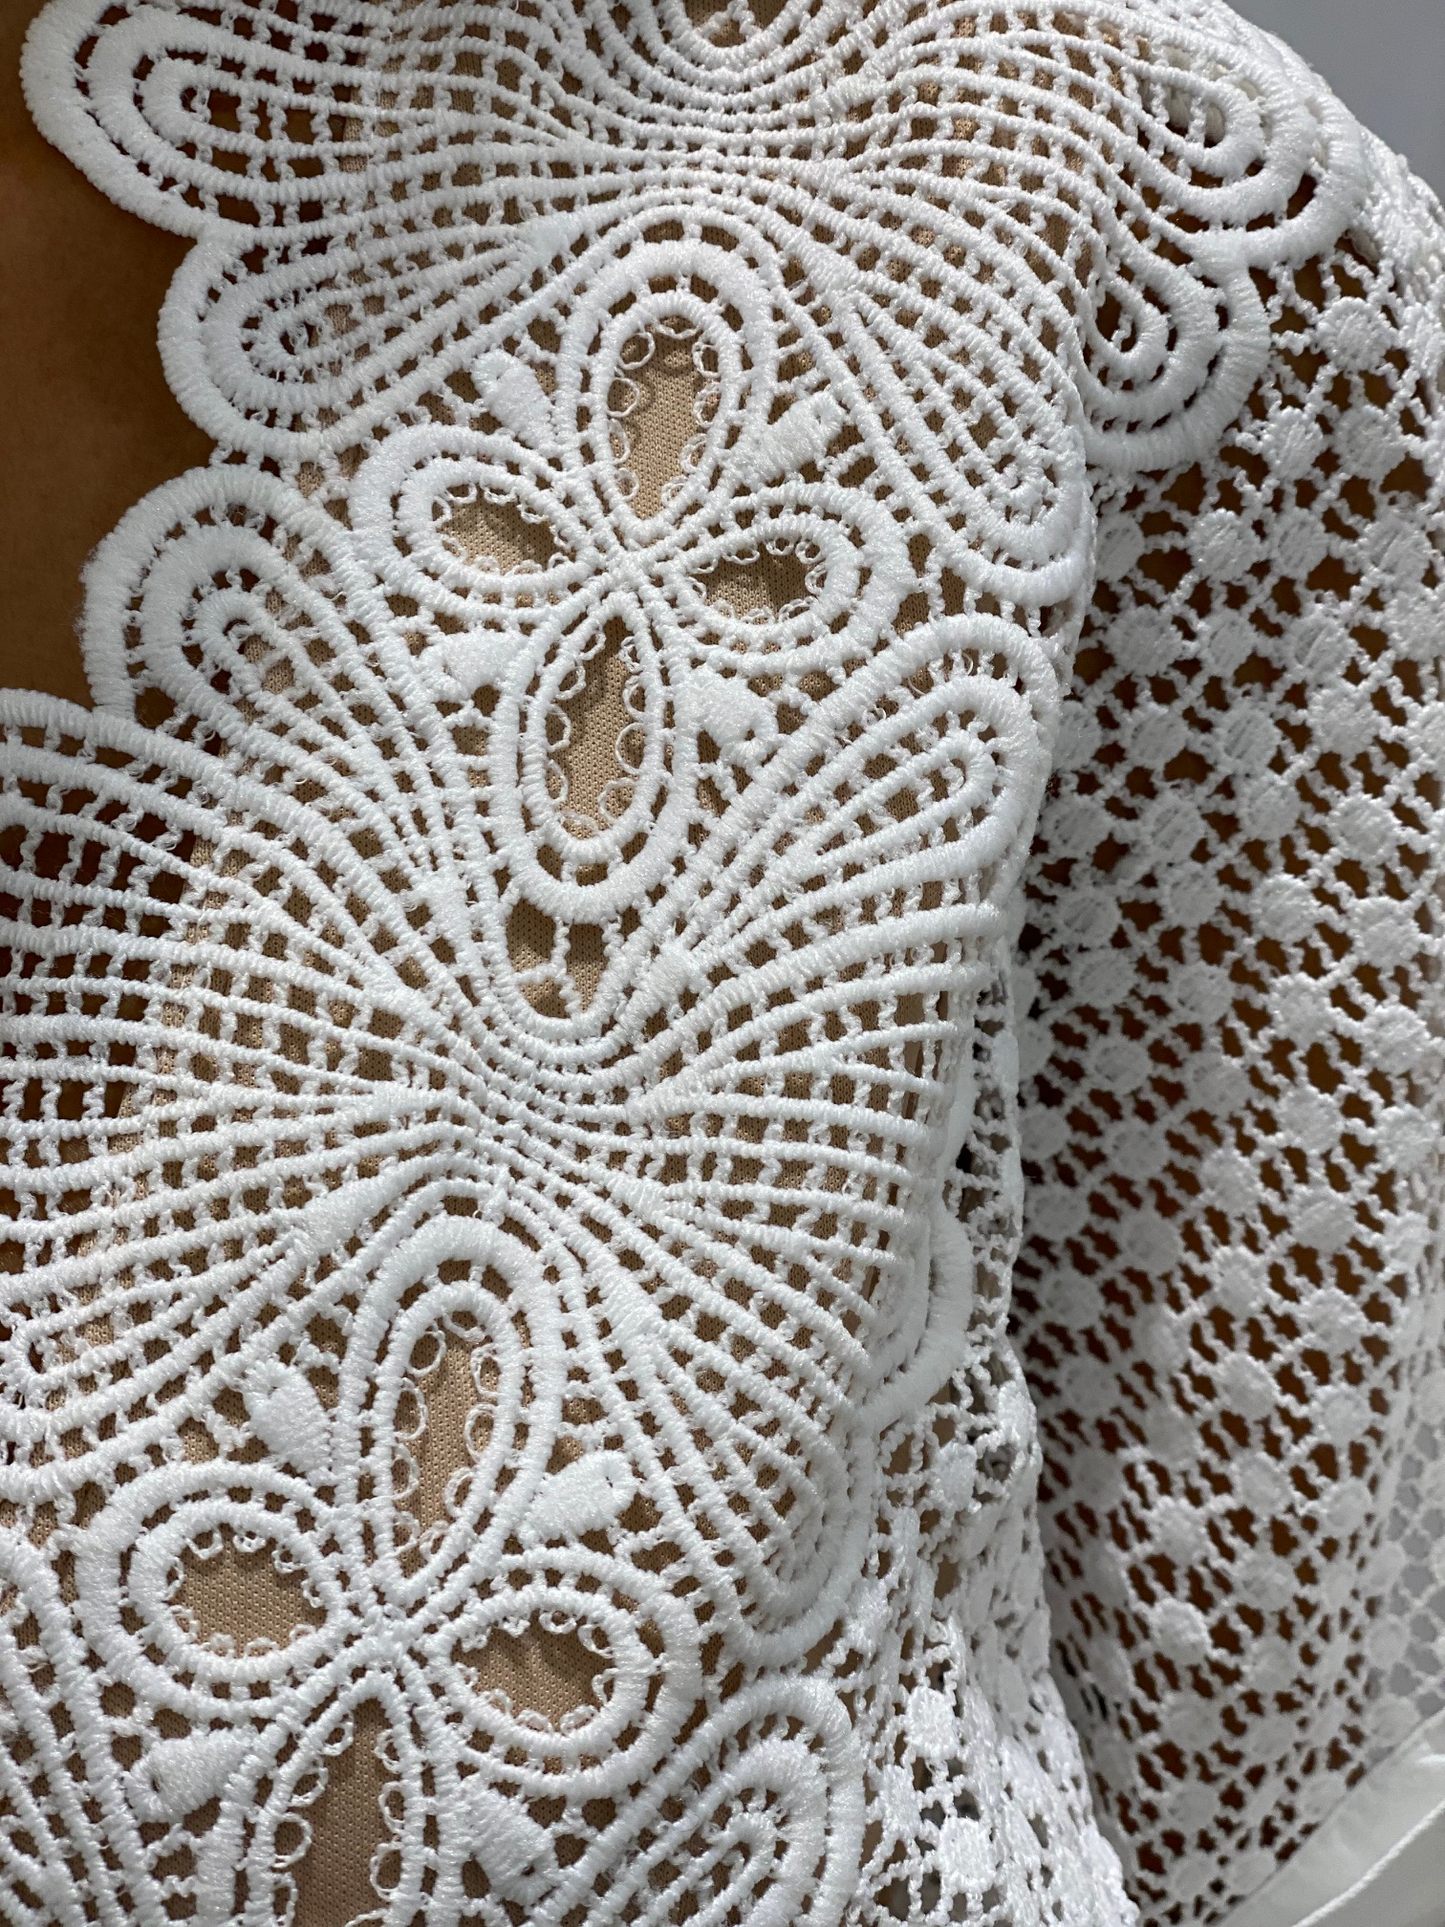 Fashion White Lace Crochet Romper Deep V-Neck with Band Sleeve Detailed